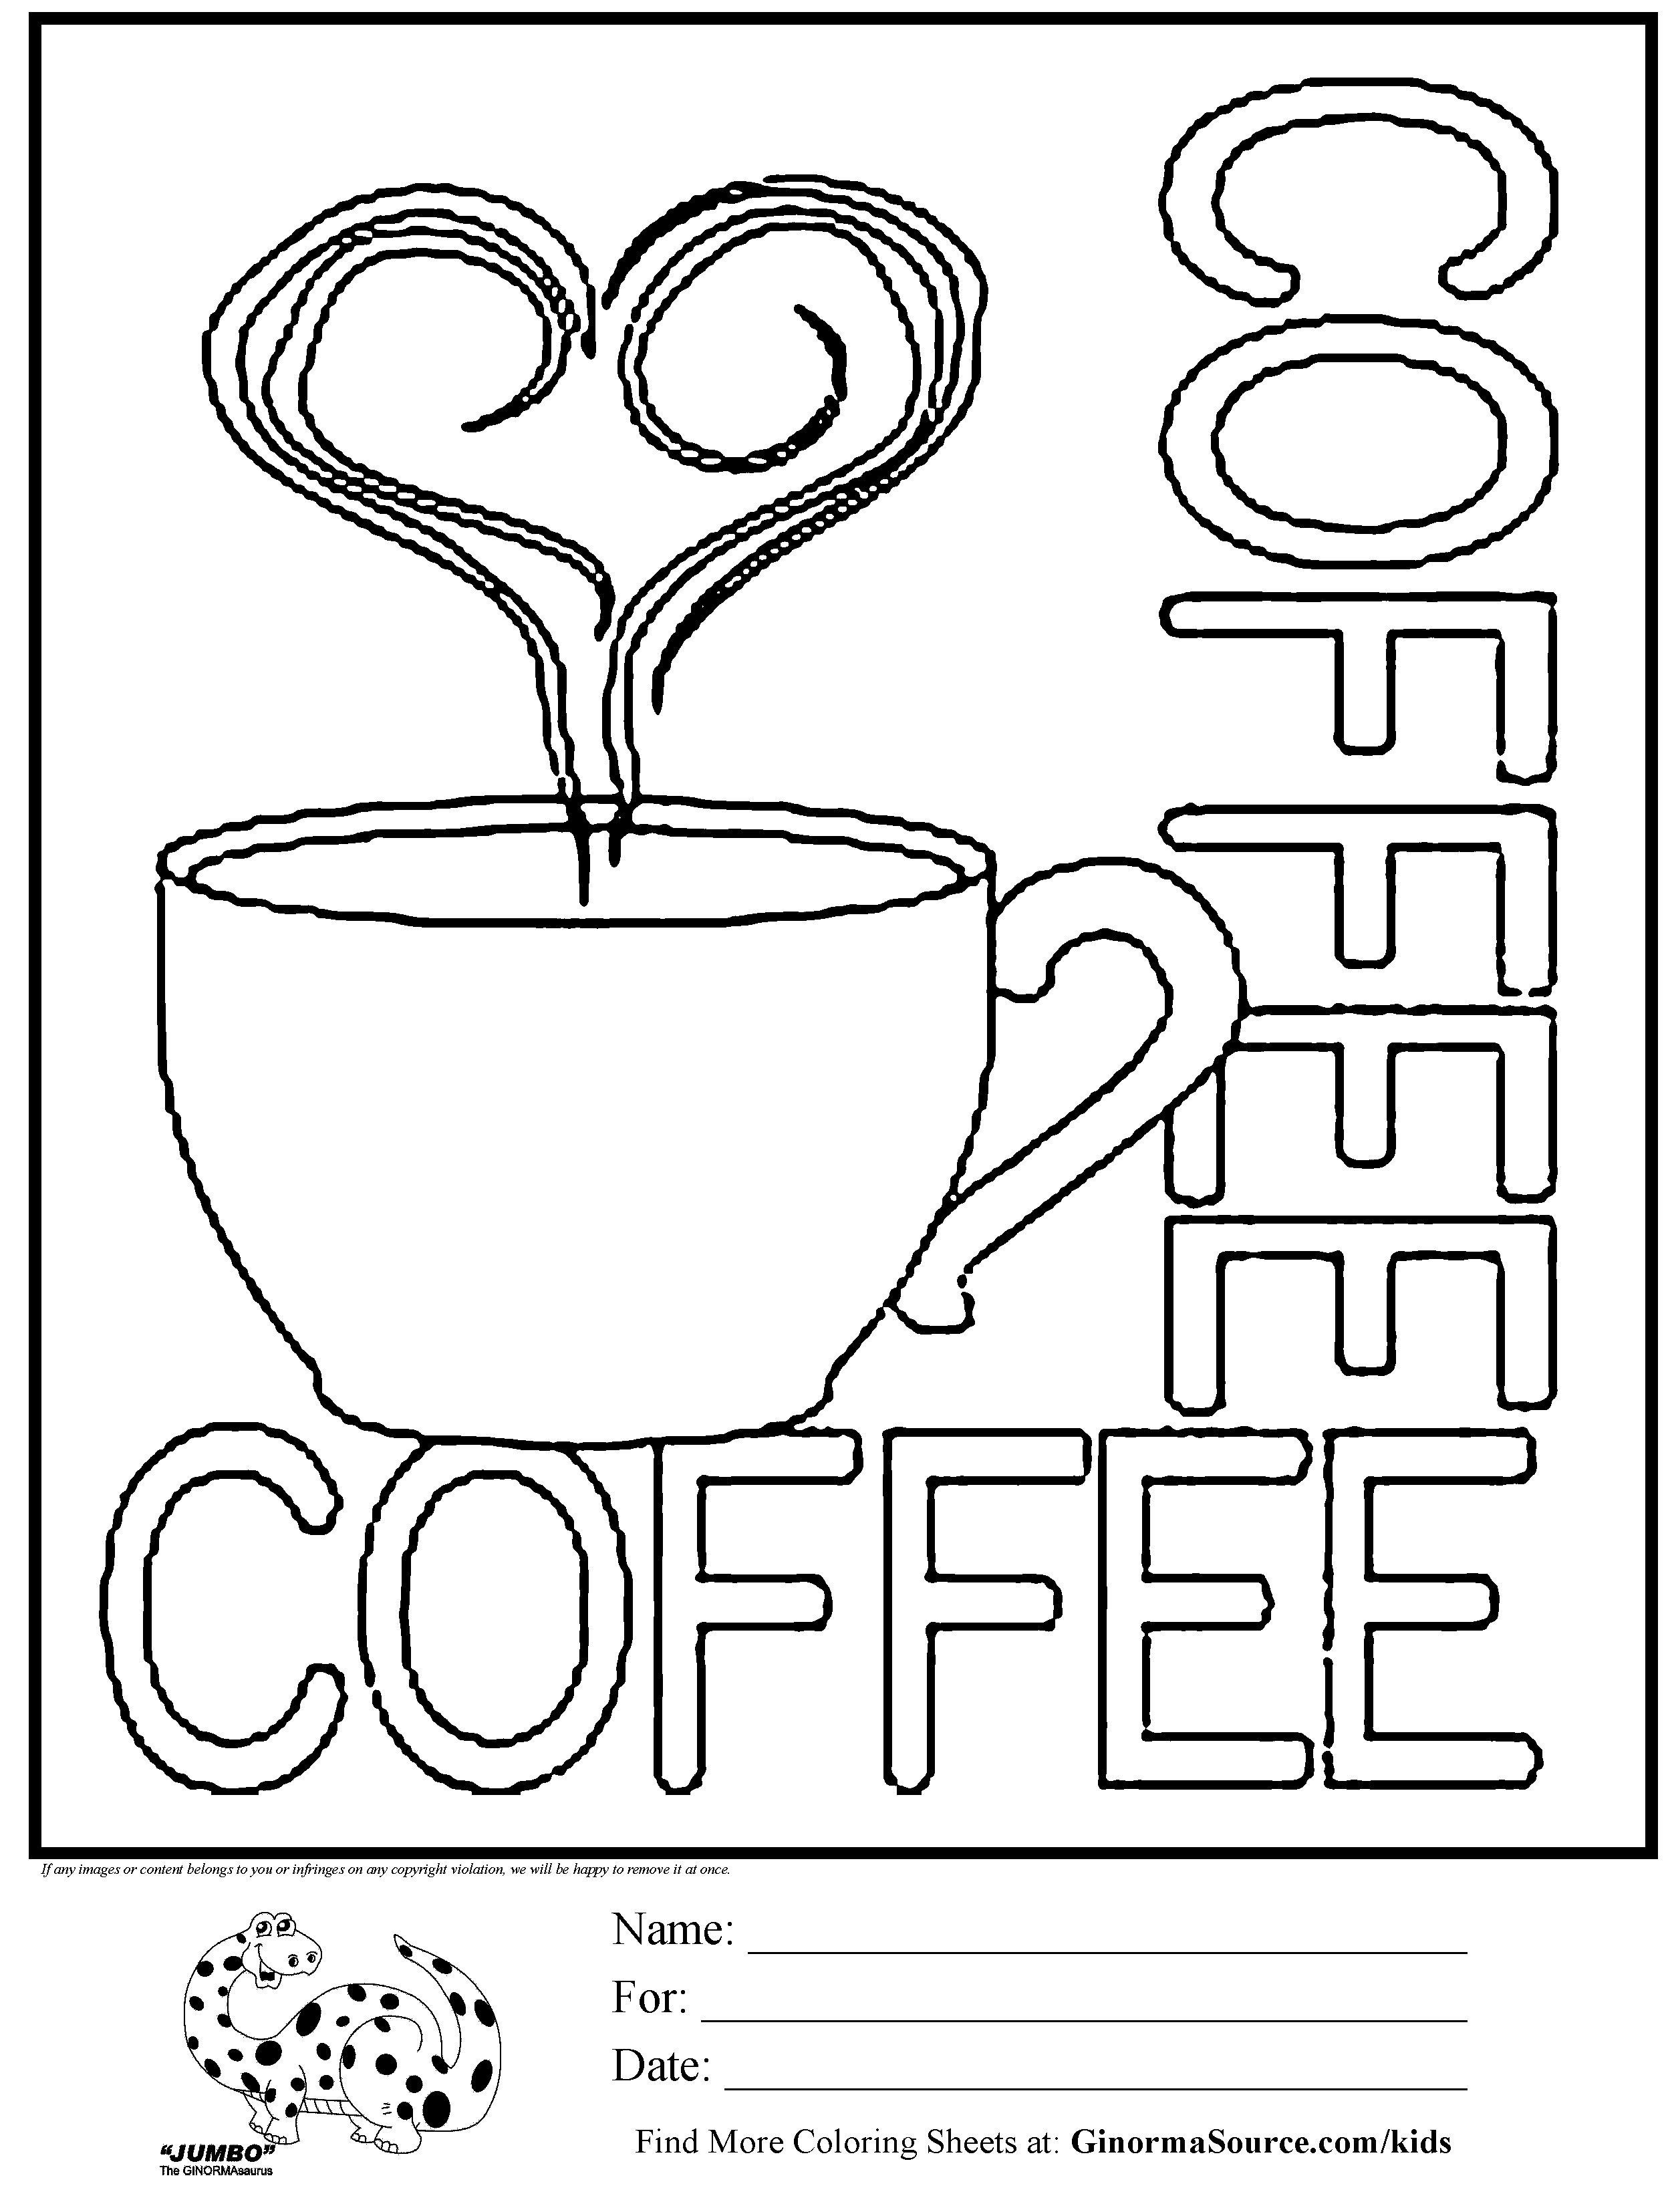 Excellent image of starbucks coloring page